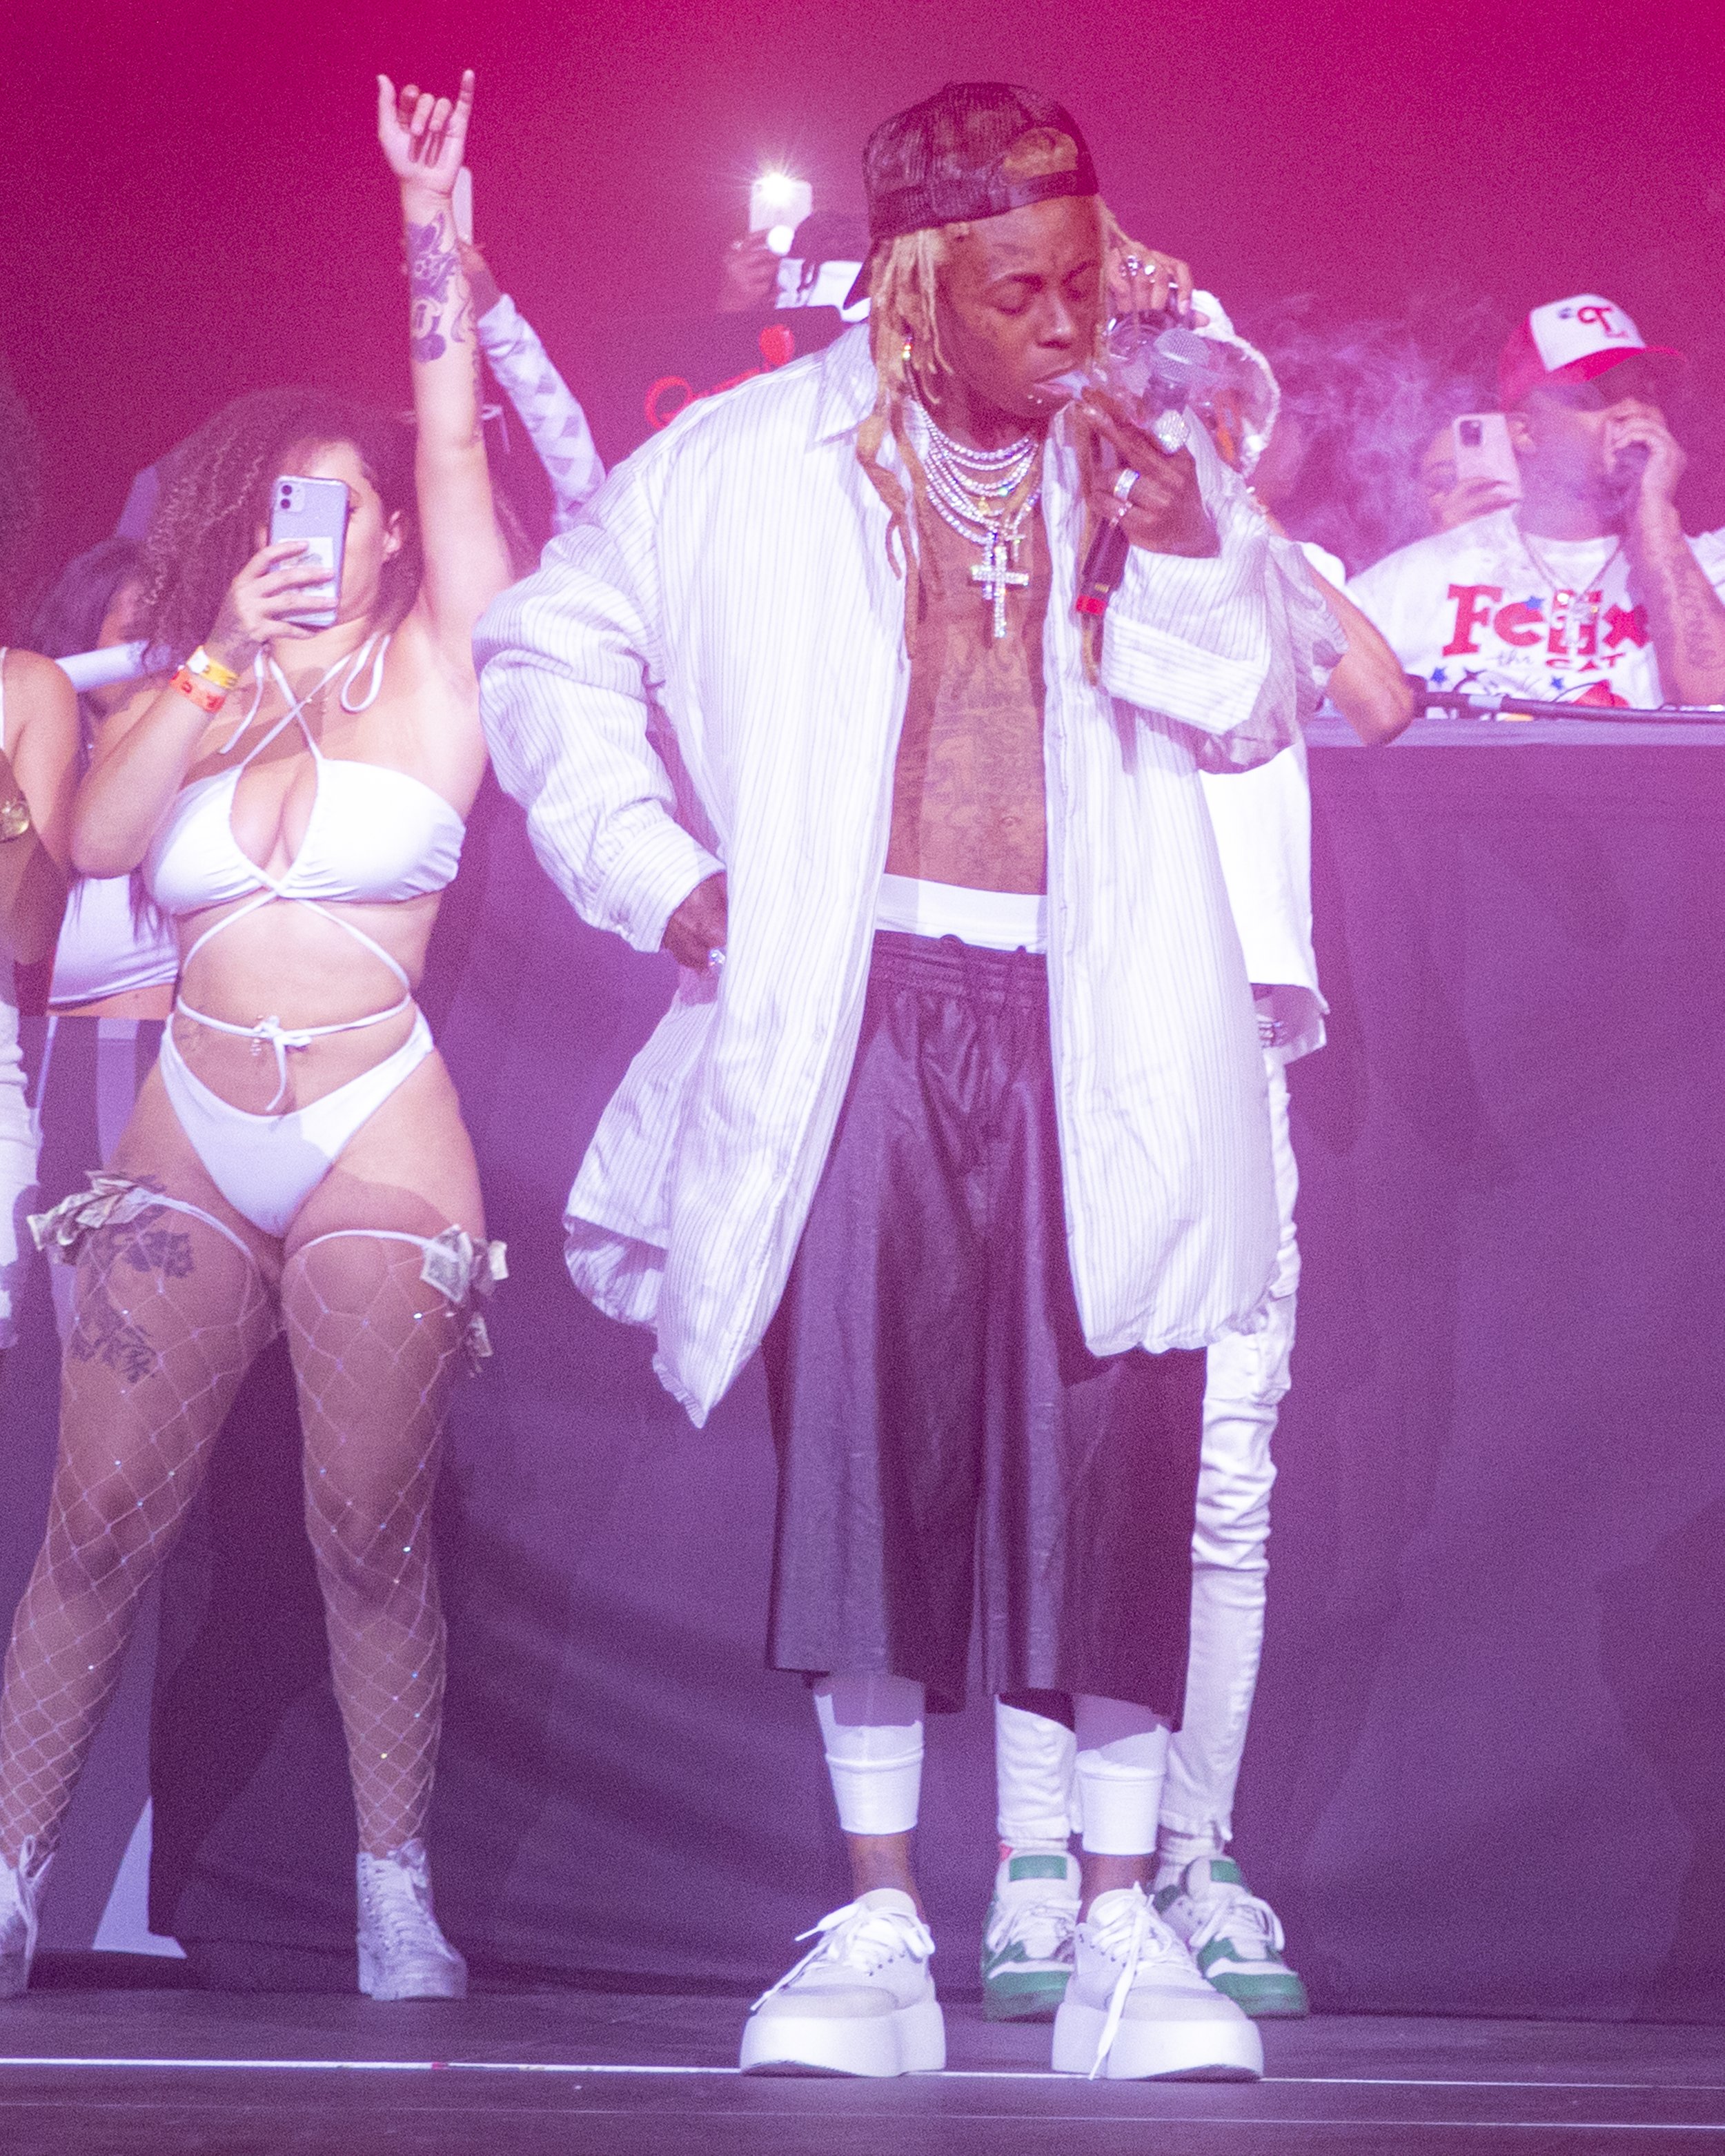 Lil Wayne and Von Miller -  The 18th Annual All White Attire Party -  PHOTO BY Mowgli Miles of Interracial Frineds-72.JPG